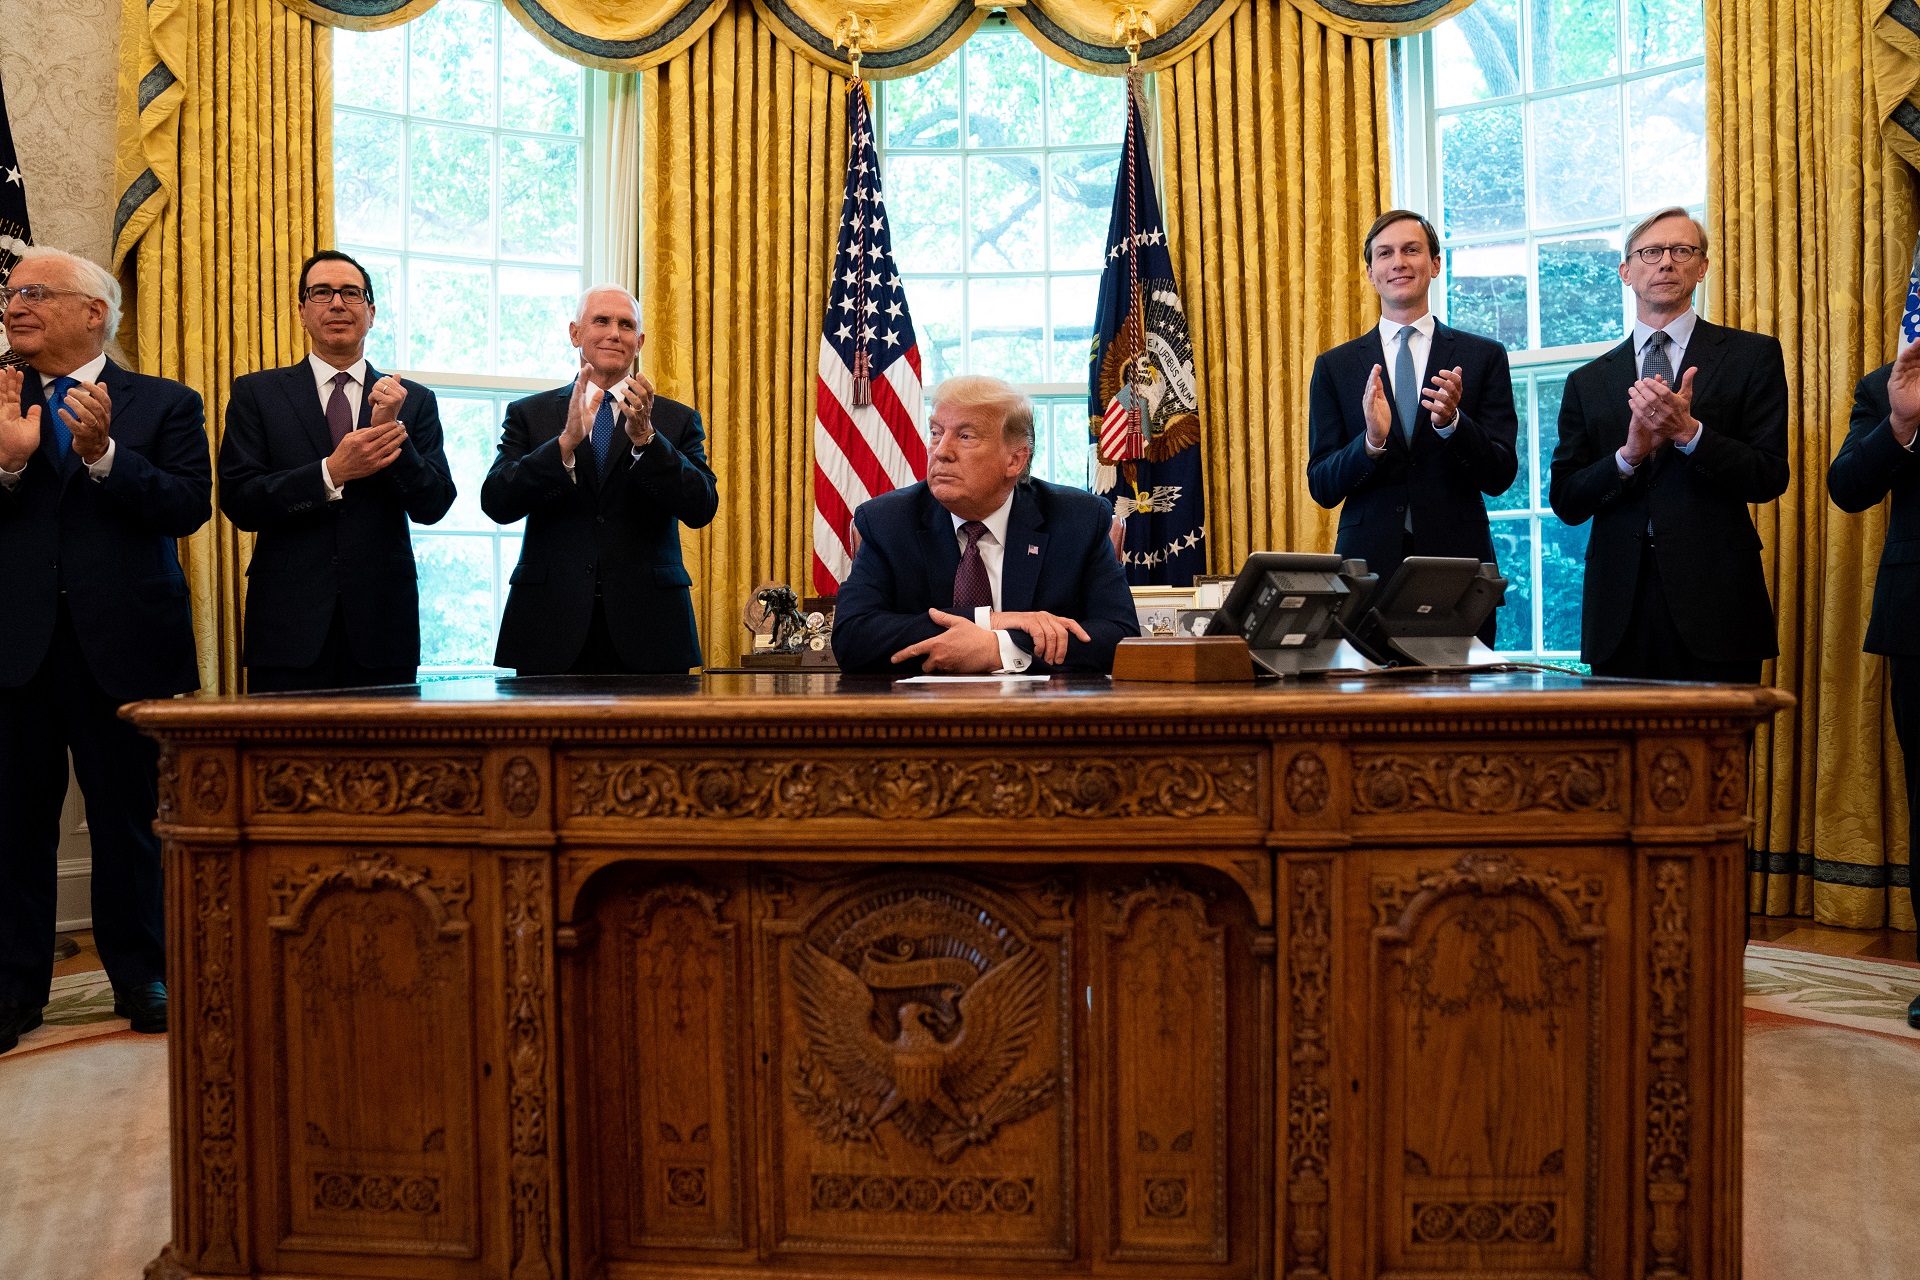 epa08662333 Cabinet members and Foreign Service Officers applaud after US President Donald J. Trump's (C) announcement that Bahrain would normalize relations with Israel, in the Oval Office at the White House in Washington DC, USA, on 11 September 2020.  EPA/Anna Moneymaker / POOL